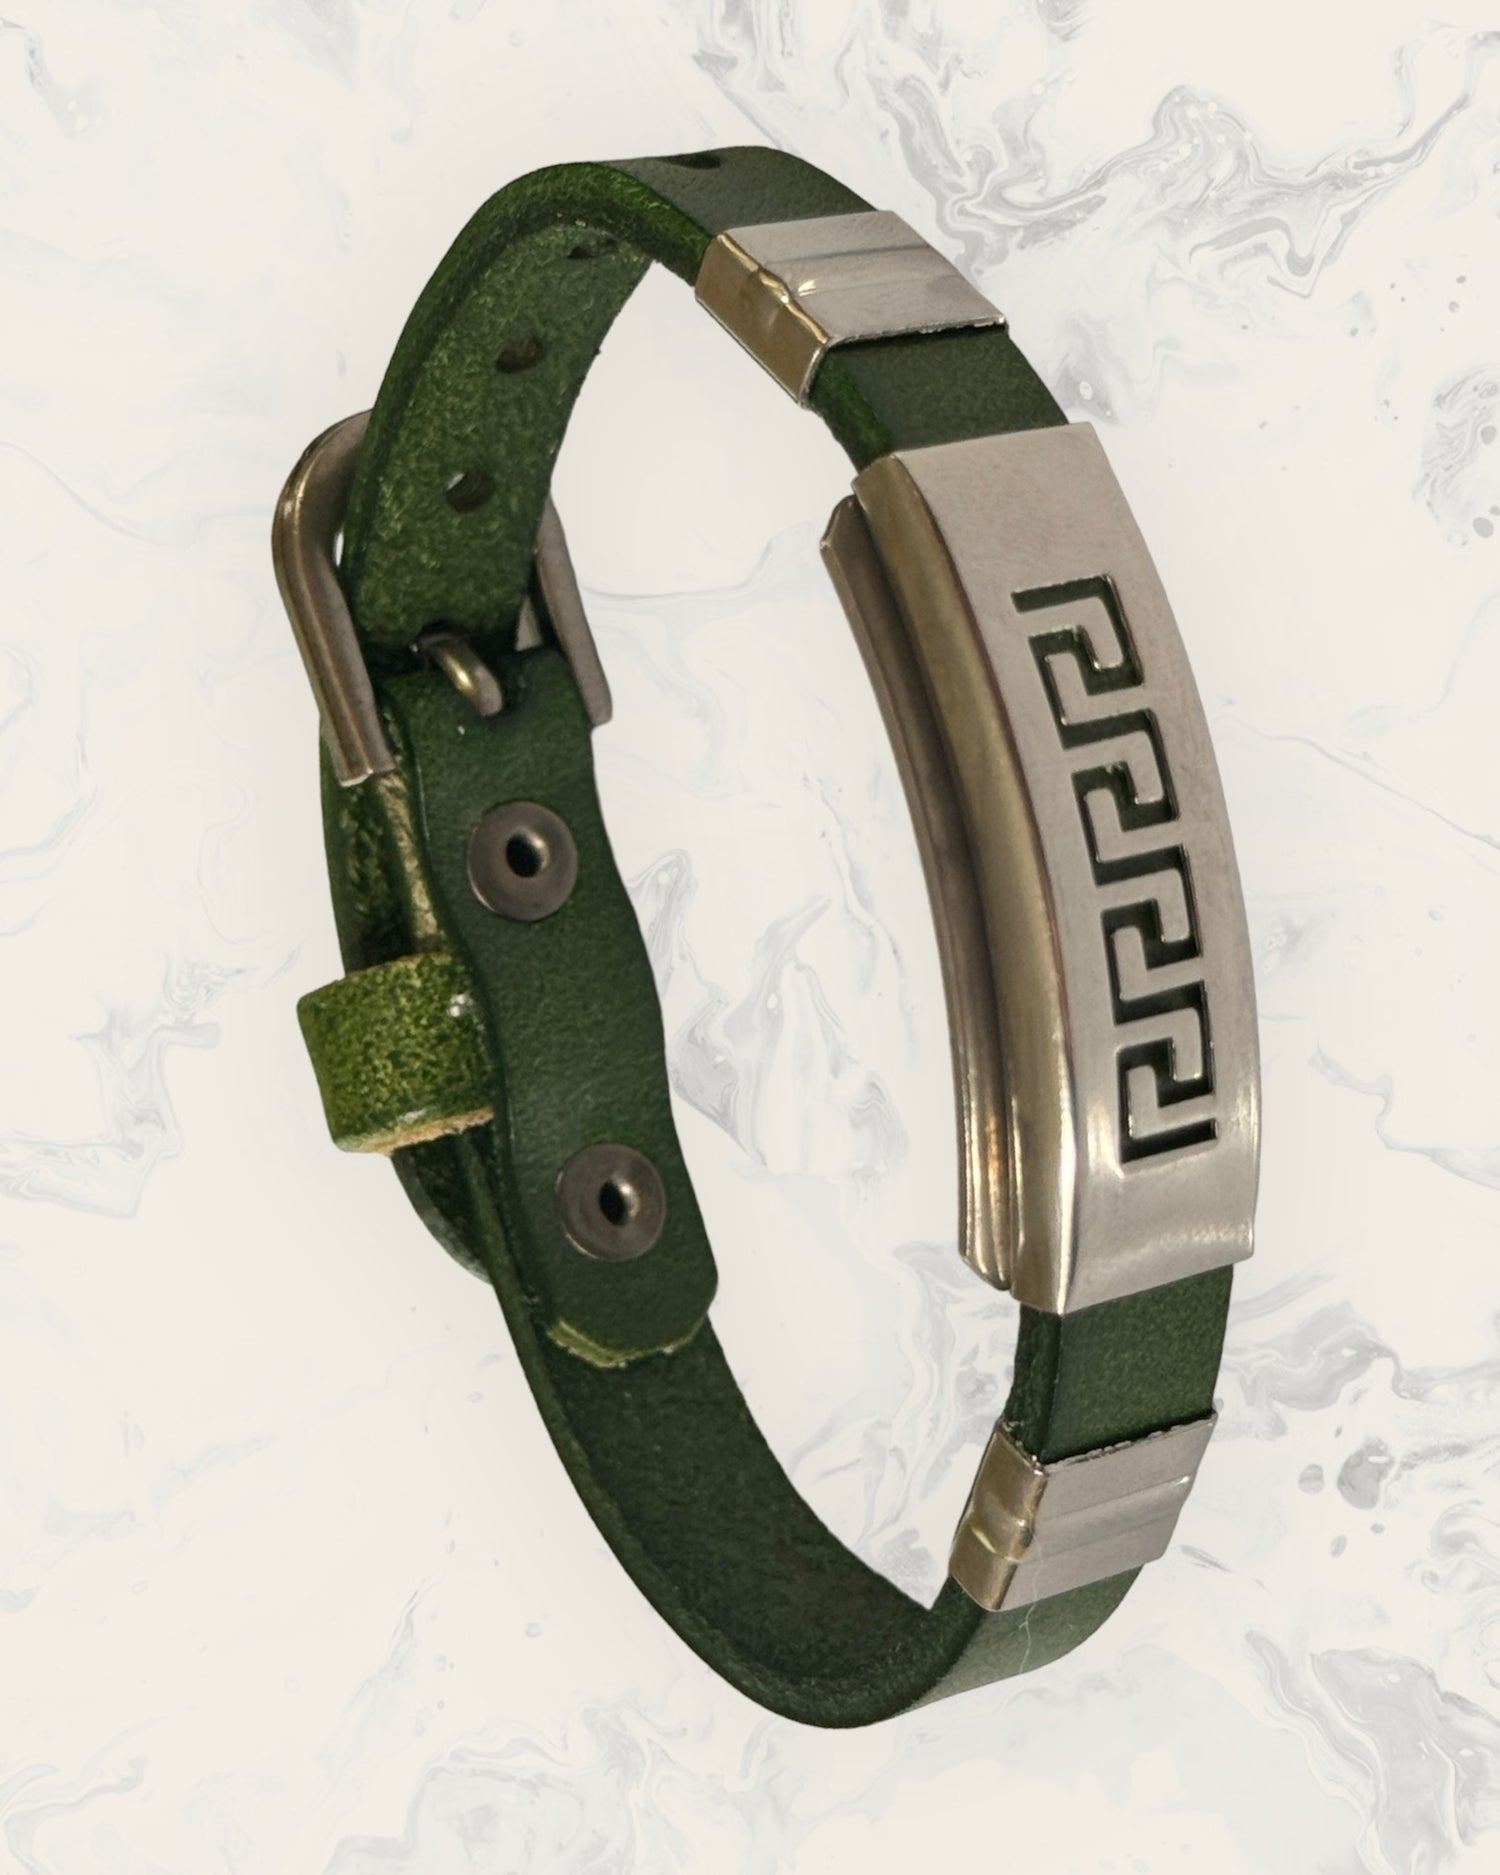 Natural Pain Relief and EMF Protection Bracelet Leather Band Color Green with Greek Key design on a silver metal slider